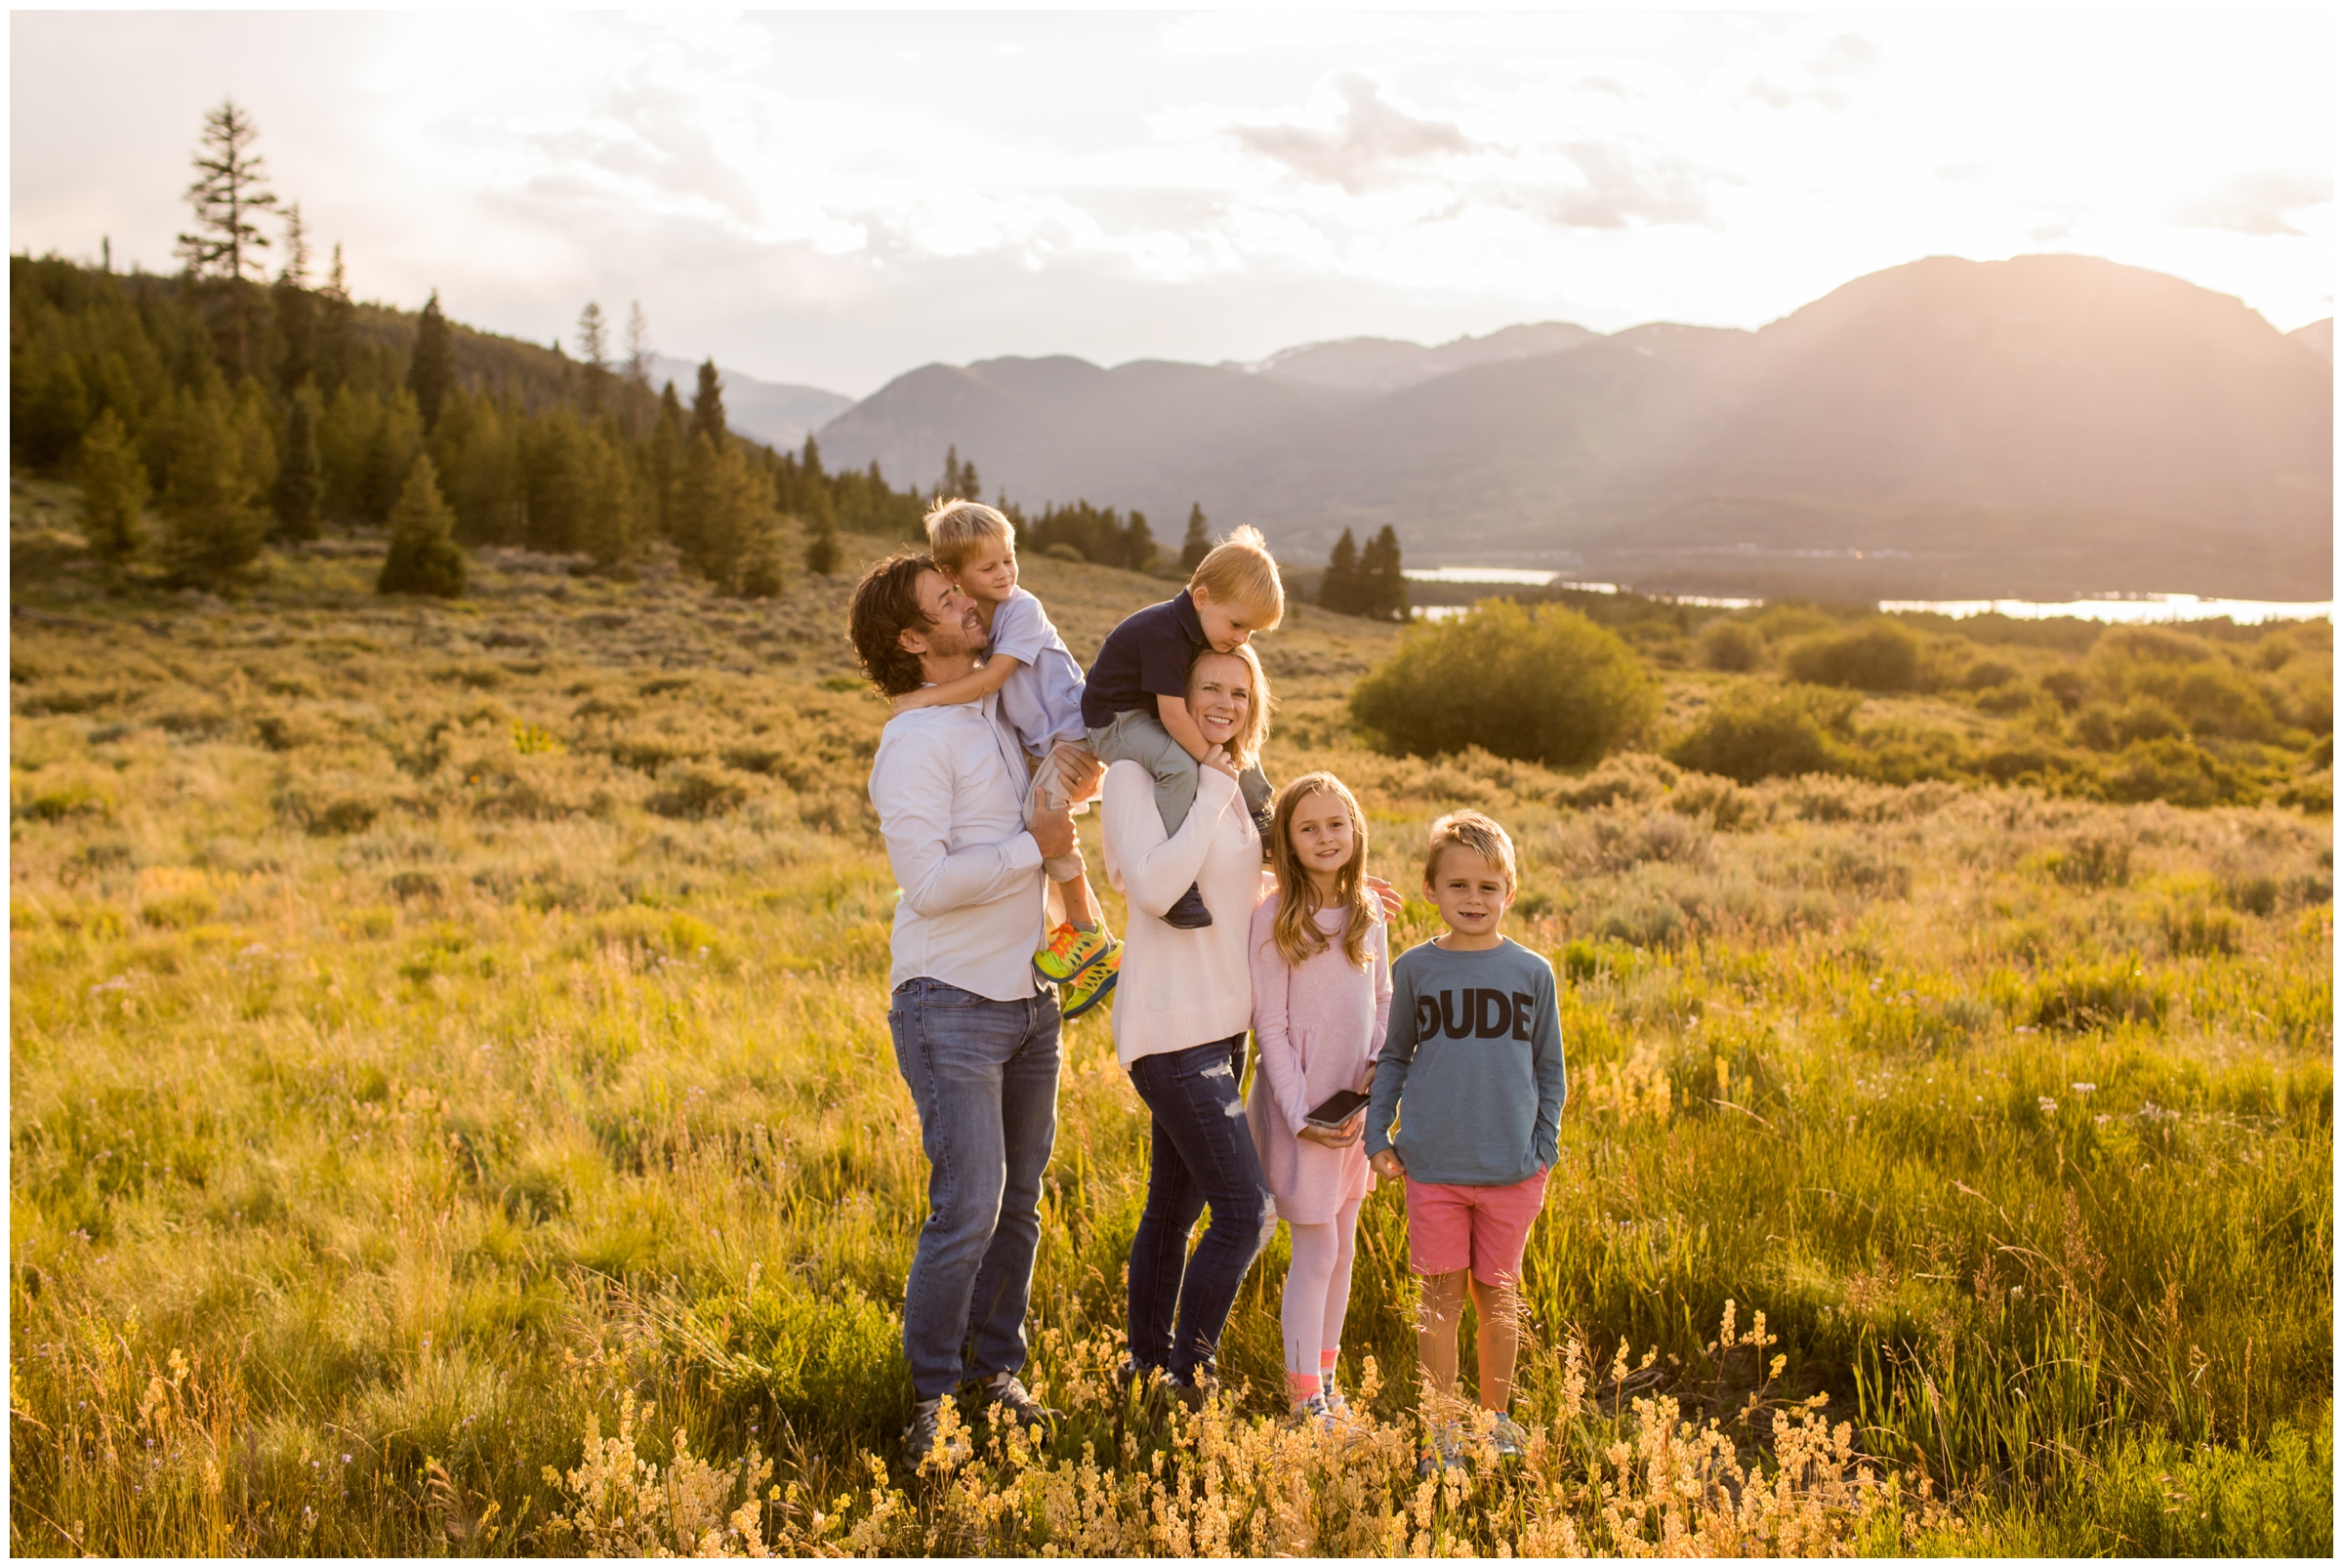 Windy point campground family photography session near Breckenridge mountains 